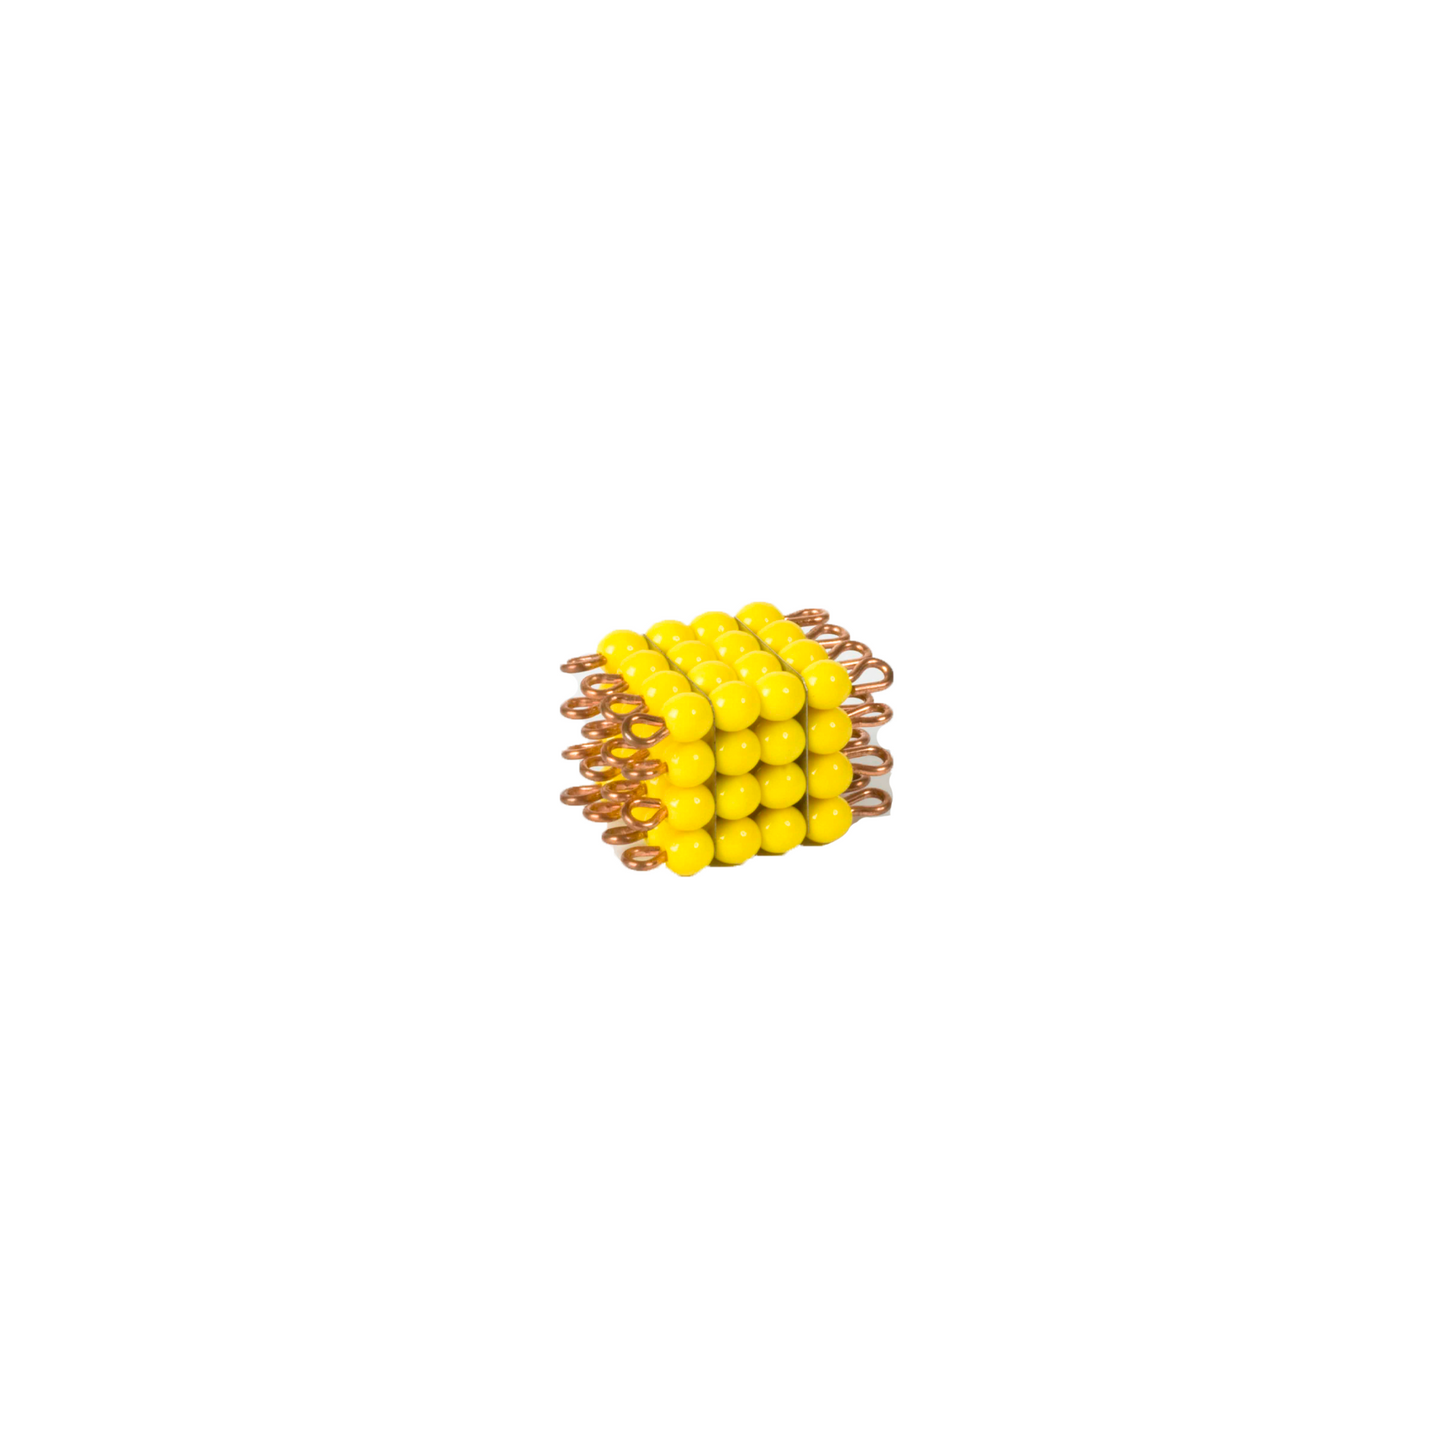 Cube of 4 in individual glass beads: yellow - Nienhuis AMI 